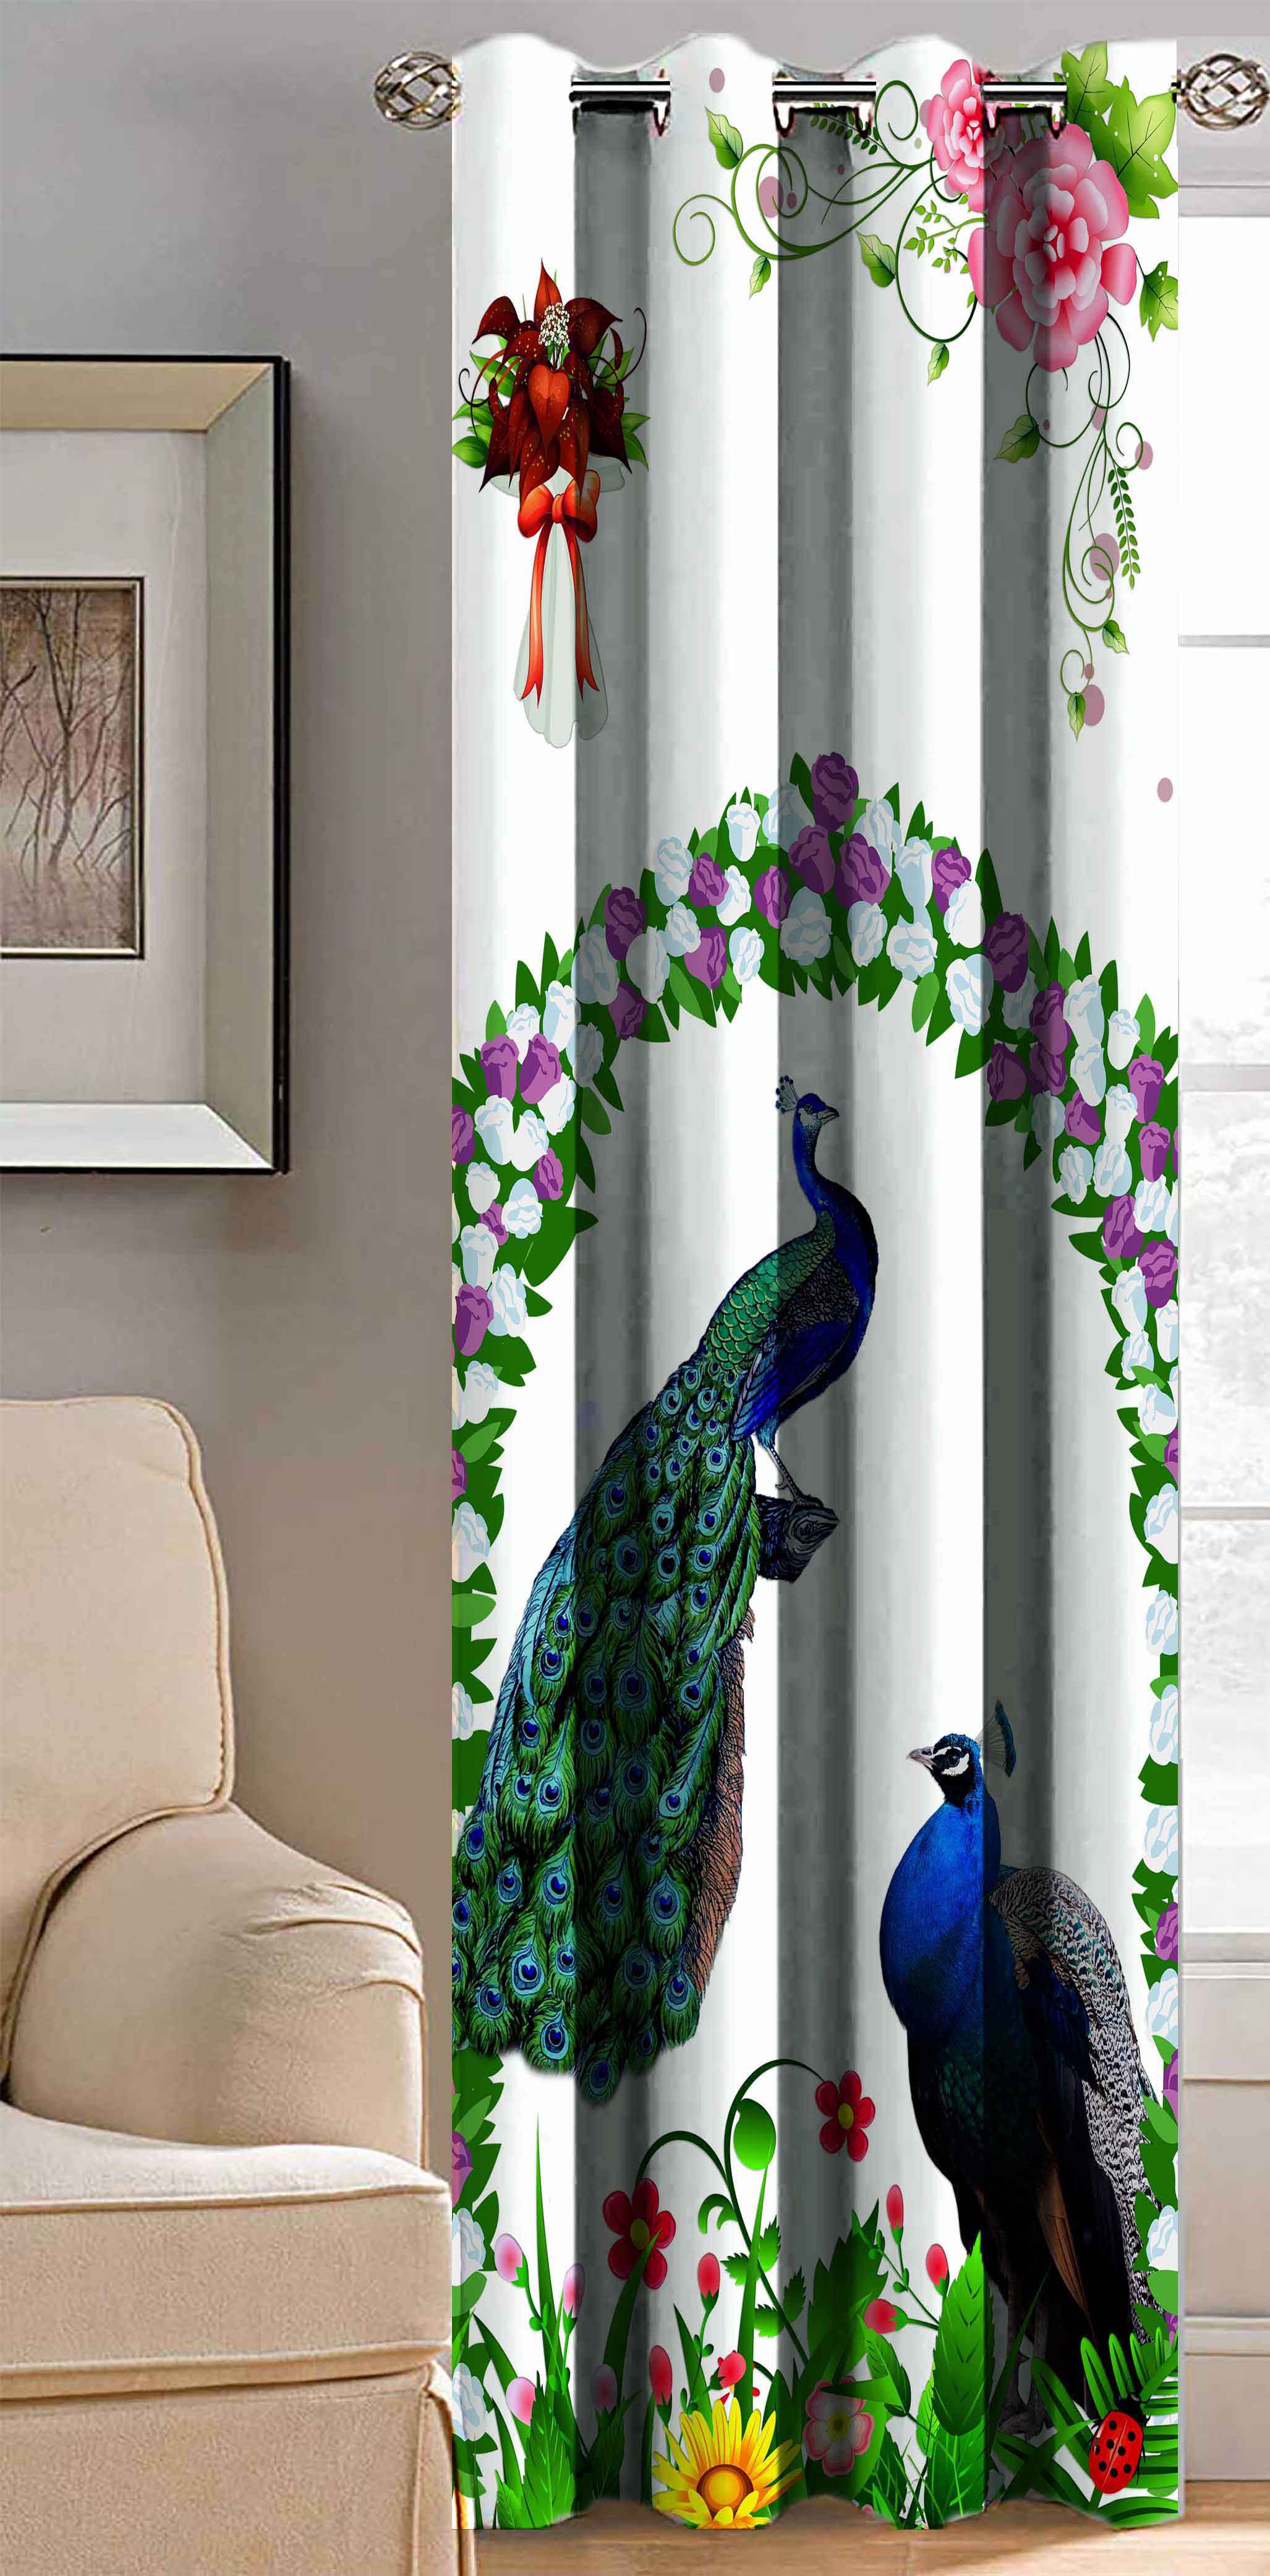     			HOMETALES Birds Semi-Transparent Eyelet Curtain 5 ft ( Pack of 1 ) - Multicolor